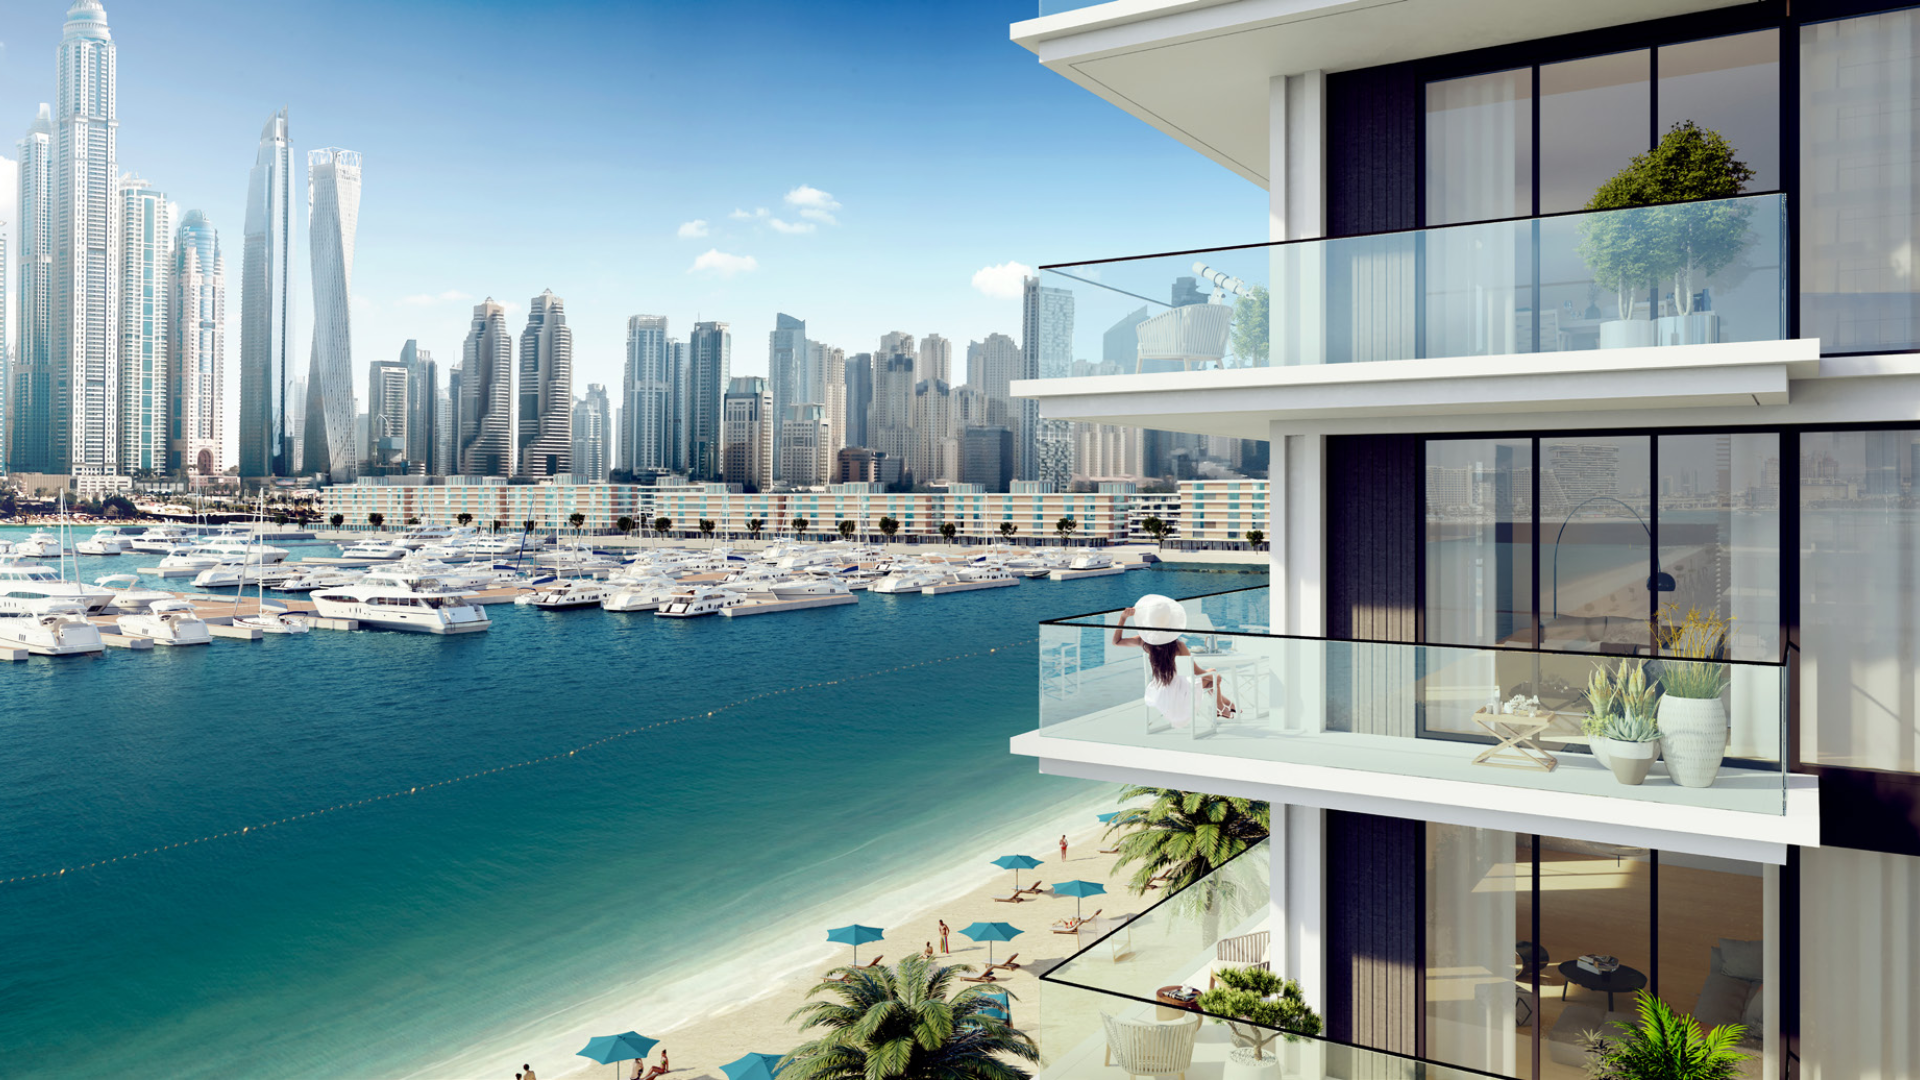  Bedroom Apartment For Sale Emaar Beachfront Lp08867 4a8be89ccf4cd80.png